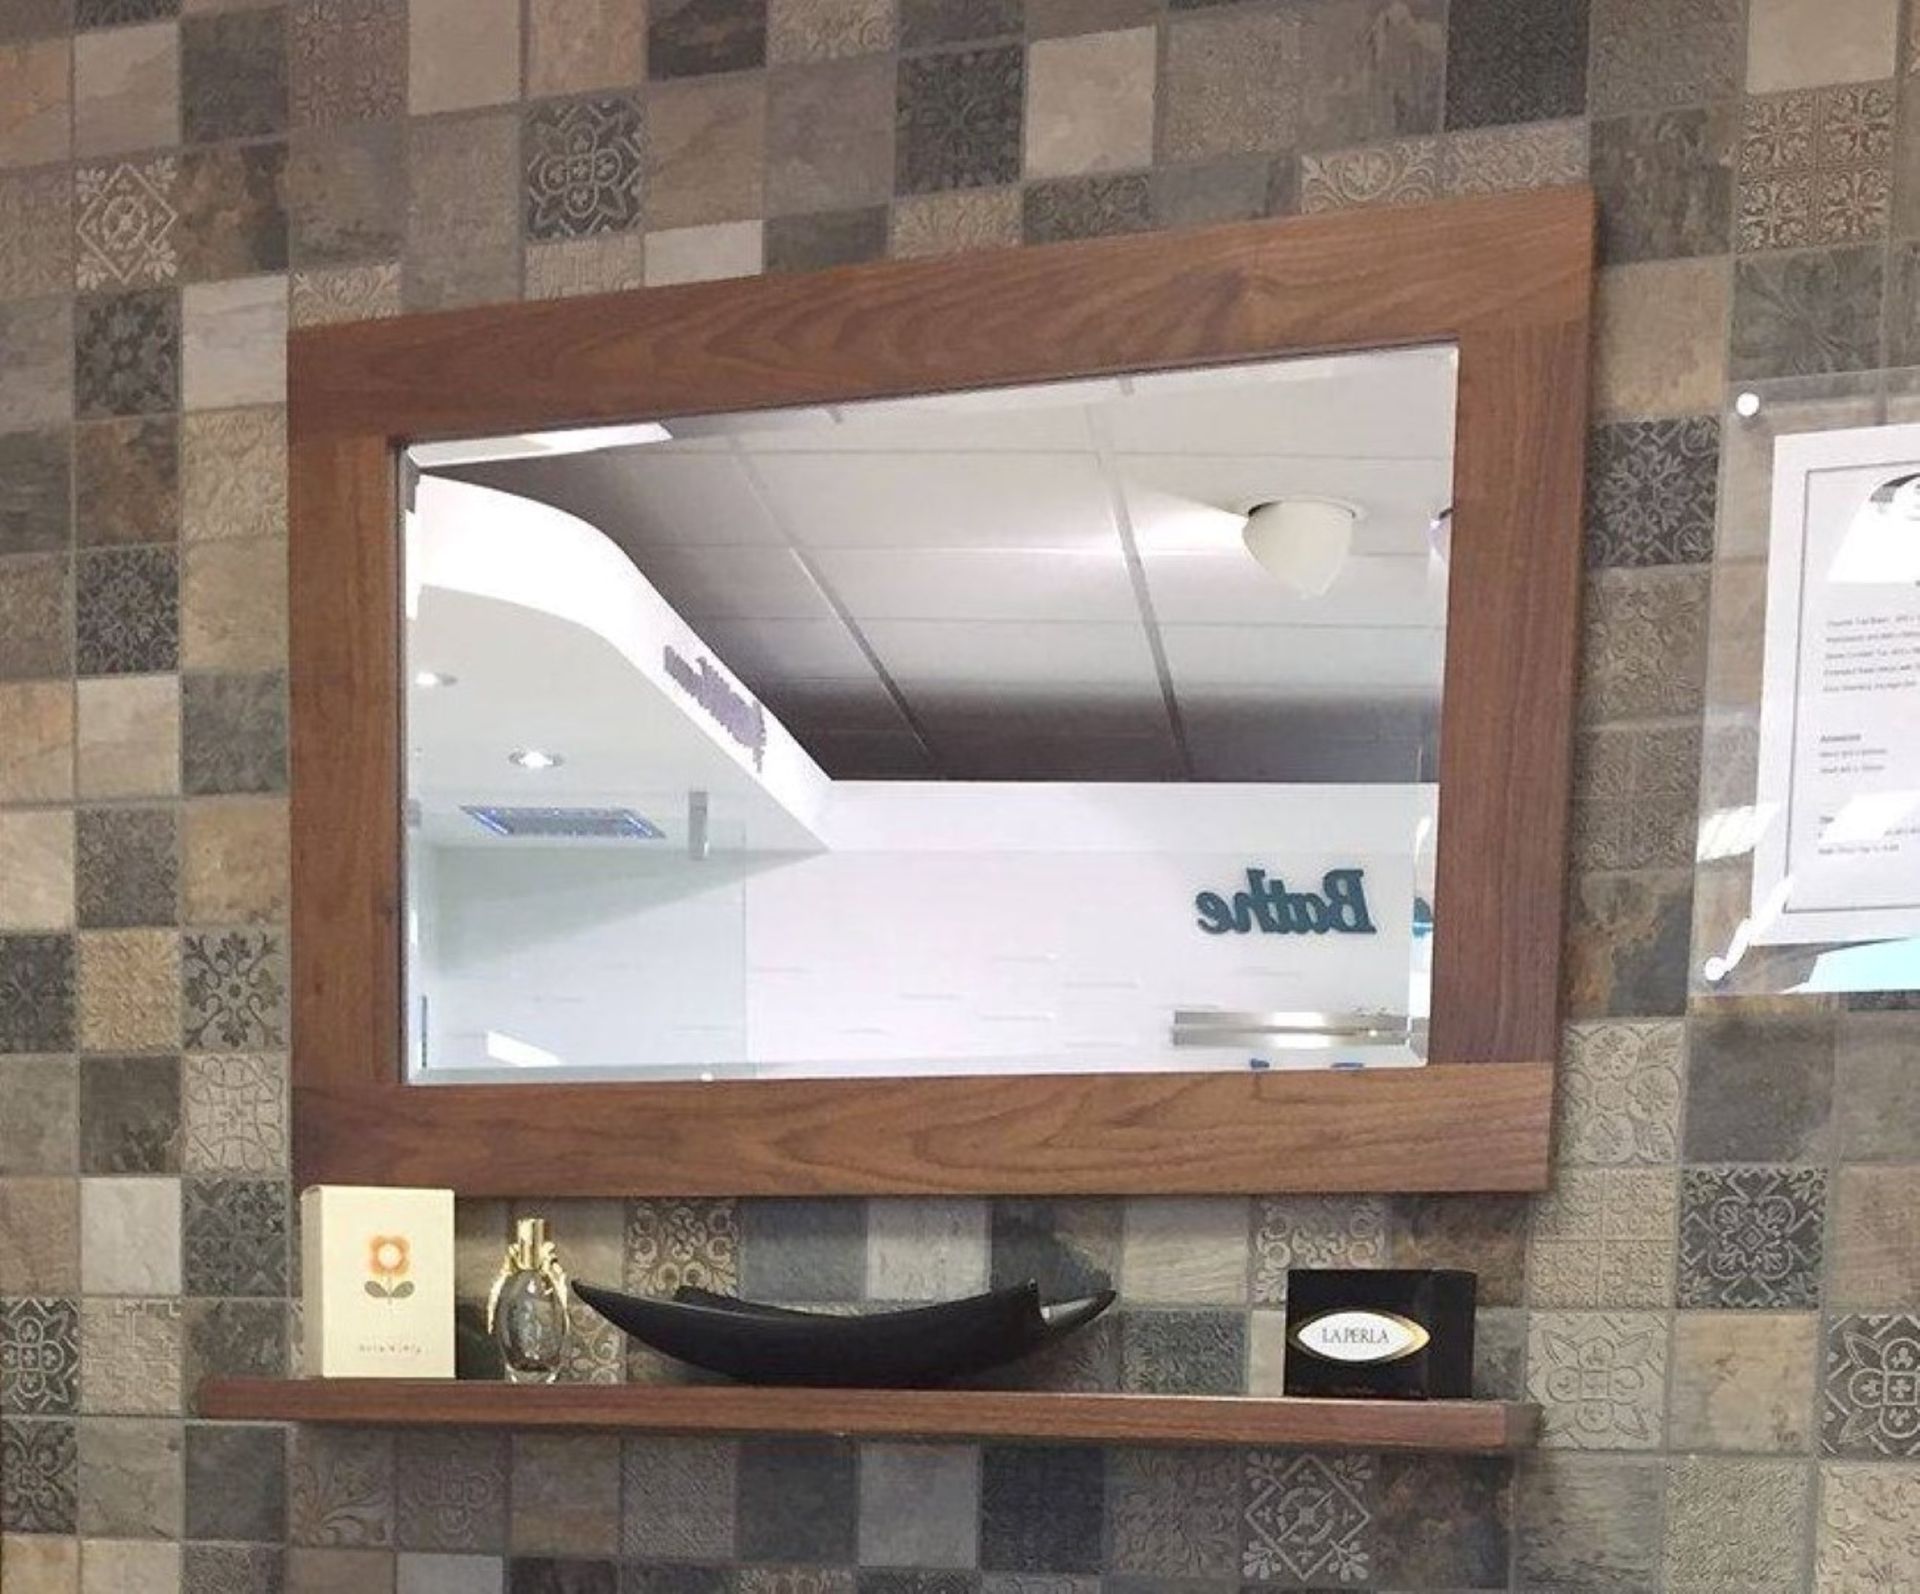 1 x Stonearth Medium Wall Mirror Frame - American Solid Walnut Frame For Mirrors or Pictures - Image 2 of 13